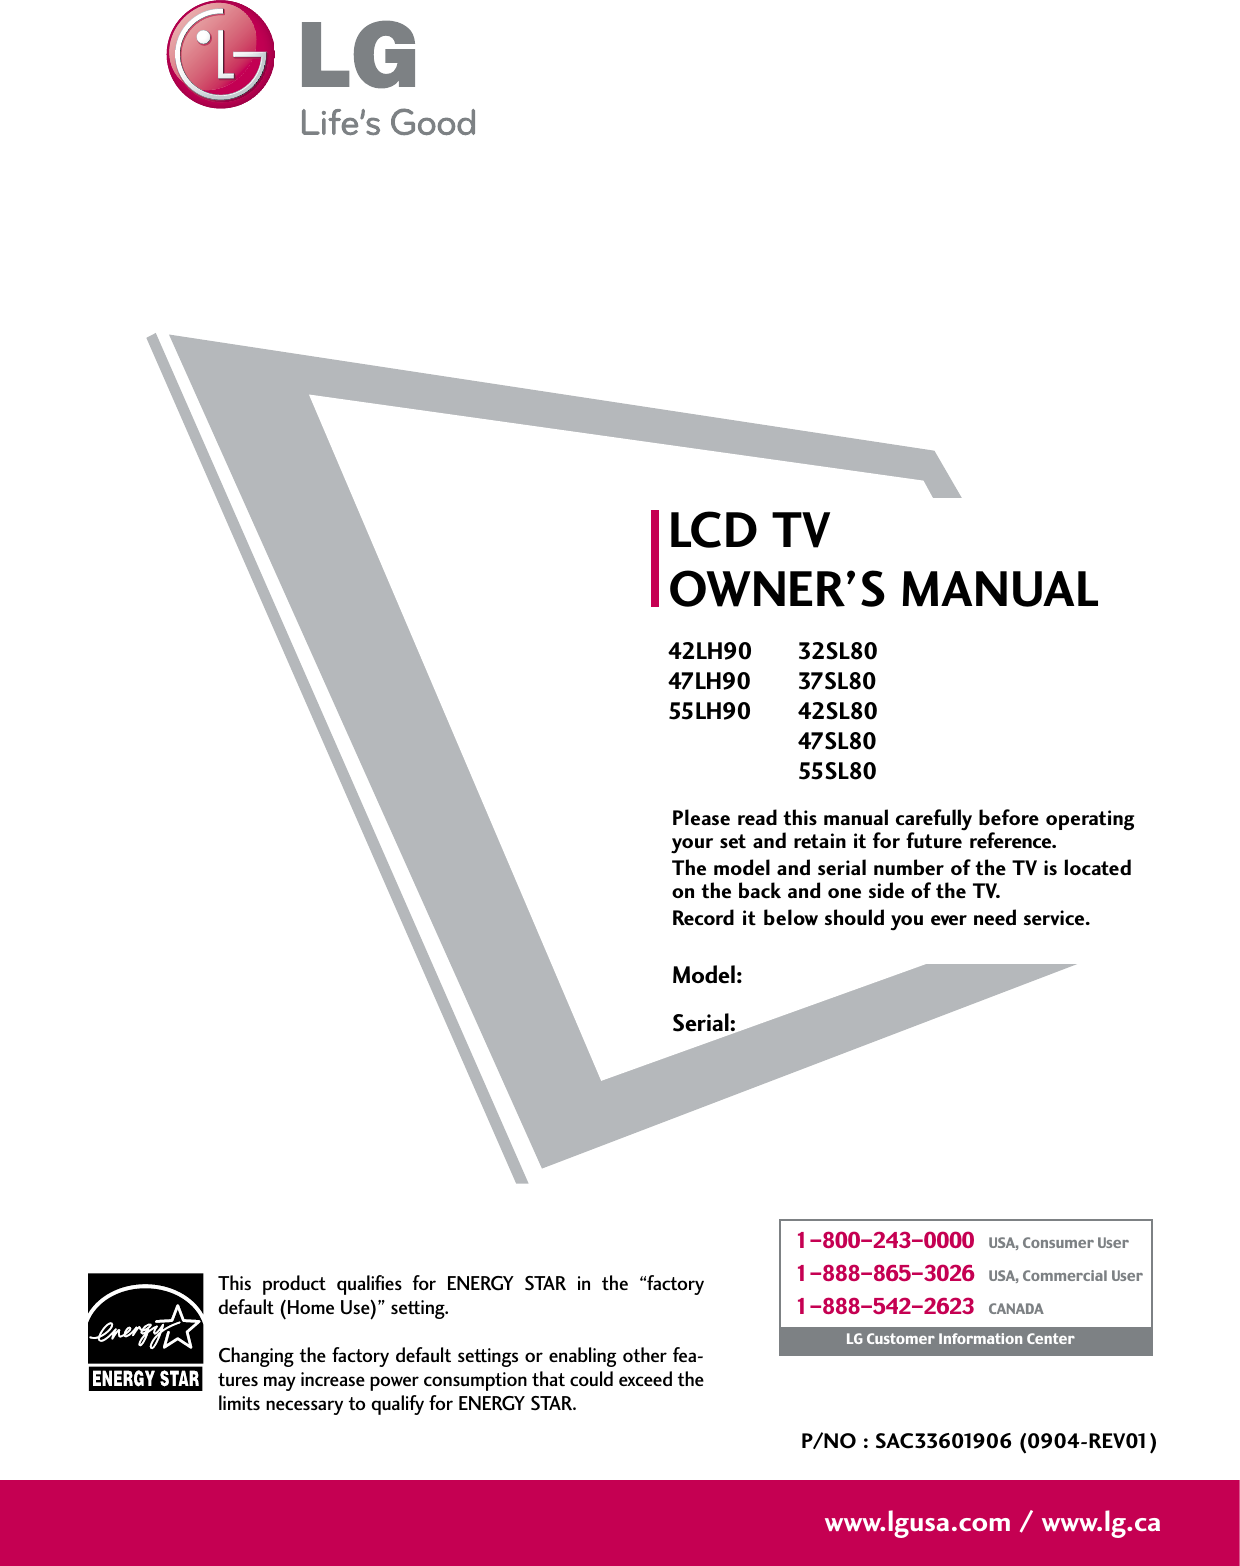 Please read this manual carefully before operatingyour set and retain it for future reference.The model and serial number of the TV is locatedon the back and one side of the TV. Record it below should you ever need service.LCD TVOWNER’S MANUAL42LH9047LH9055LH90P/NO : SAC33601906 (0904-REV01)www.lgusa.com / www.lg.caThis  product  qualifies  for  ENERGY  STAR  in  the  “factorydefault (Home Use)” setting.Changing the factory default settings or enabling other fea-tures may increase power consumption that could exceed thelimits necessary to qualify for ENERGY STAR.Model:Serial:1-800-243-0000   USA, Consumer User1-888-865-3026   USA, Commercial User1-888-542-2623   CANADALG Customer Information Center32SL8037SL8042SL8047SL8055SL80